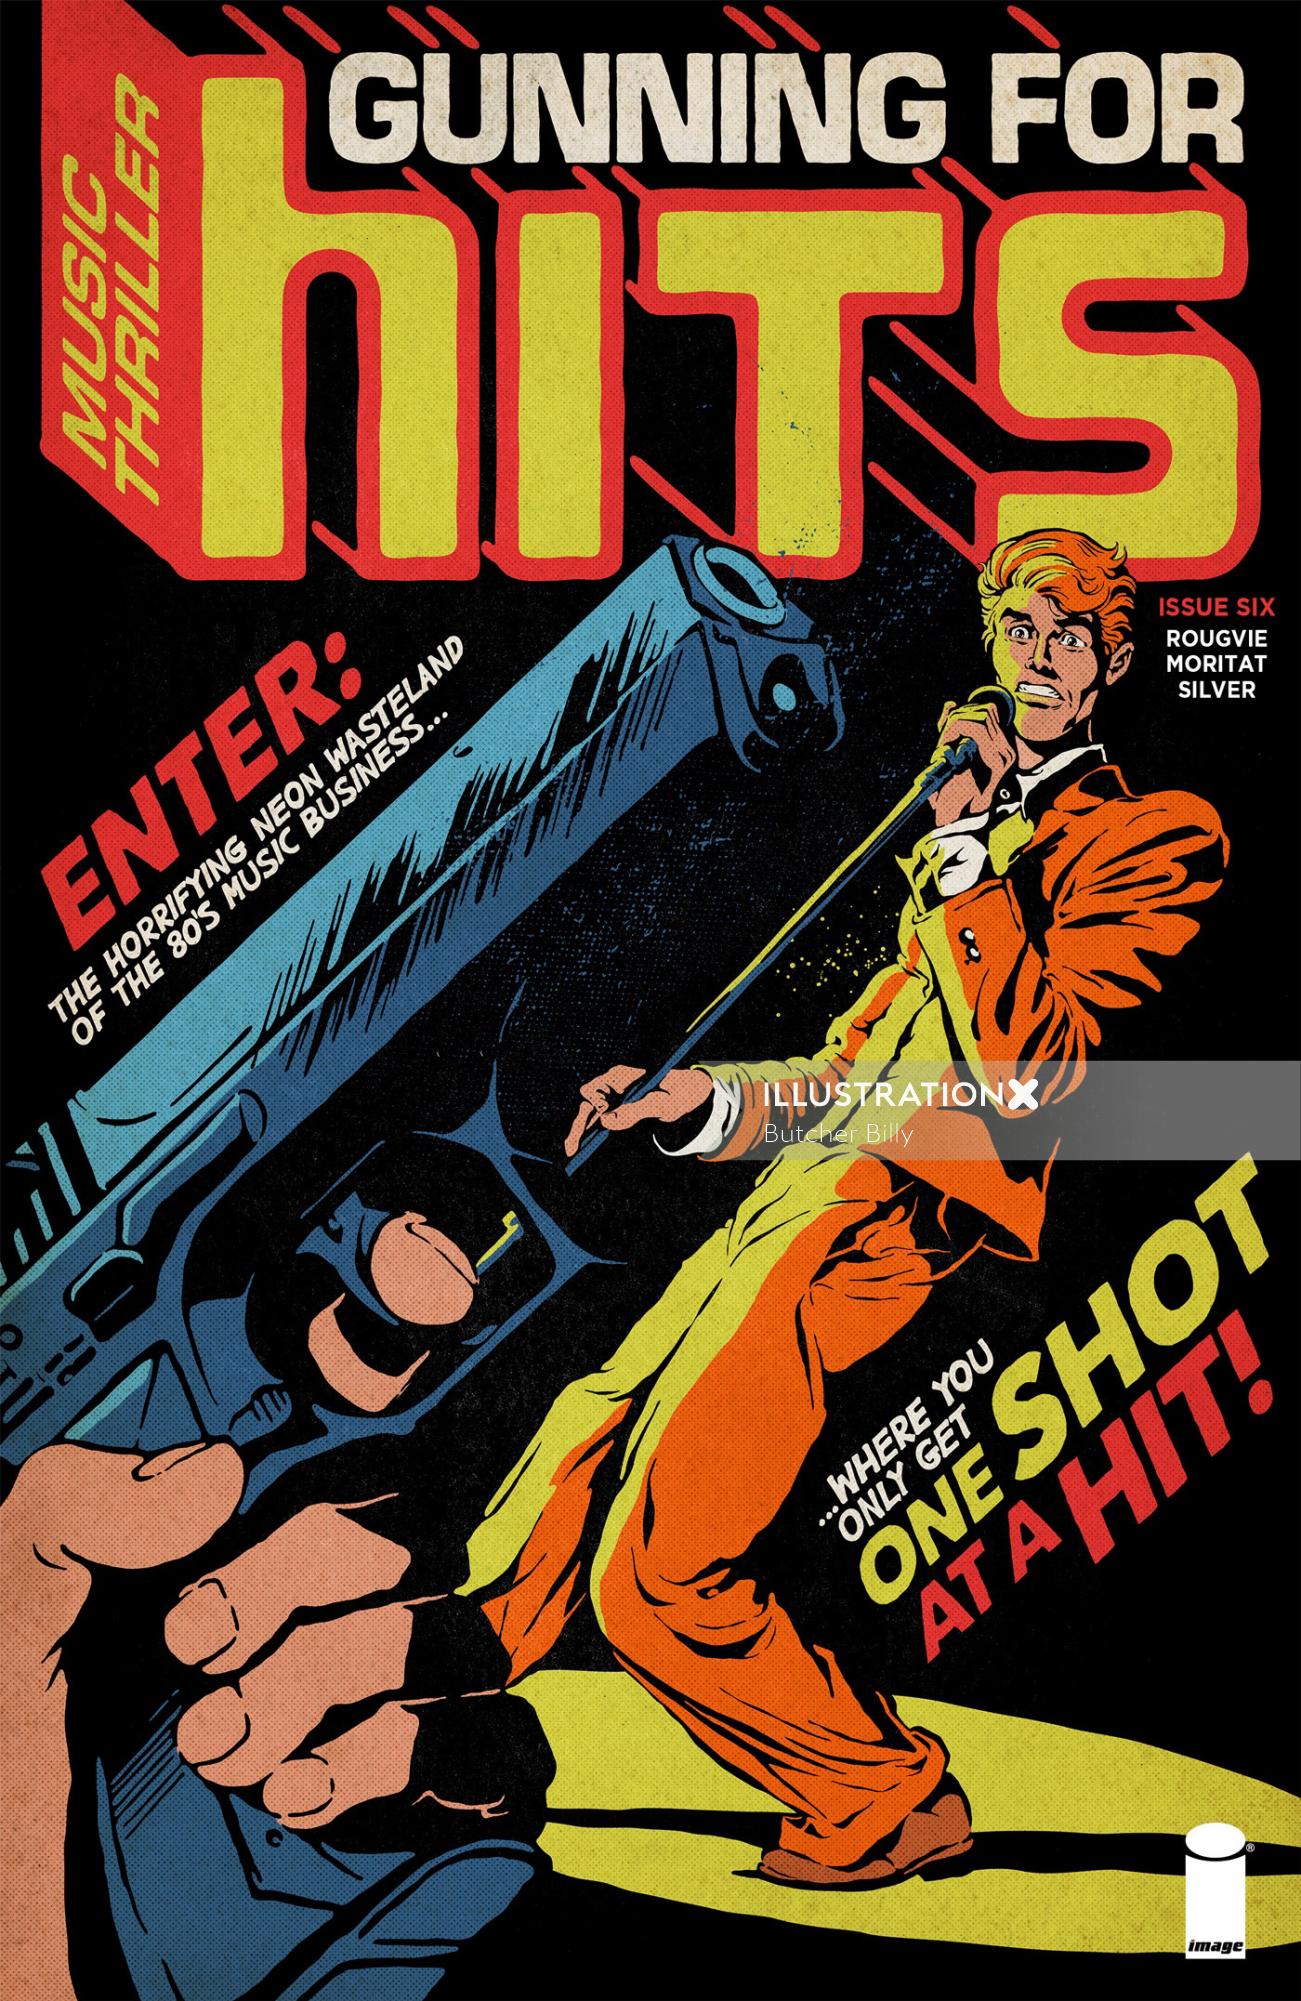 Gunning for hits musical thriller cover by Butcher Billy